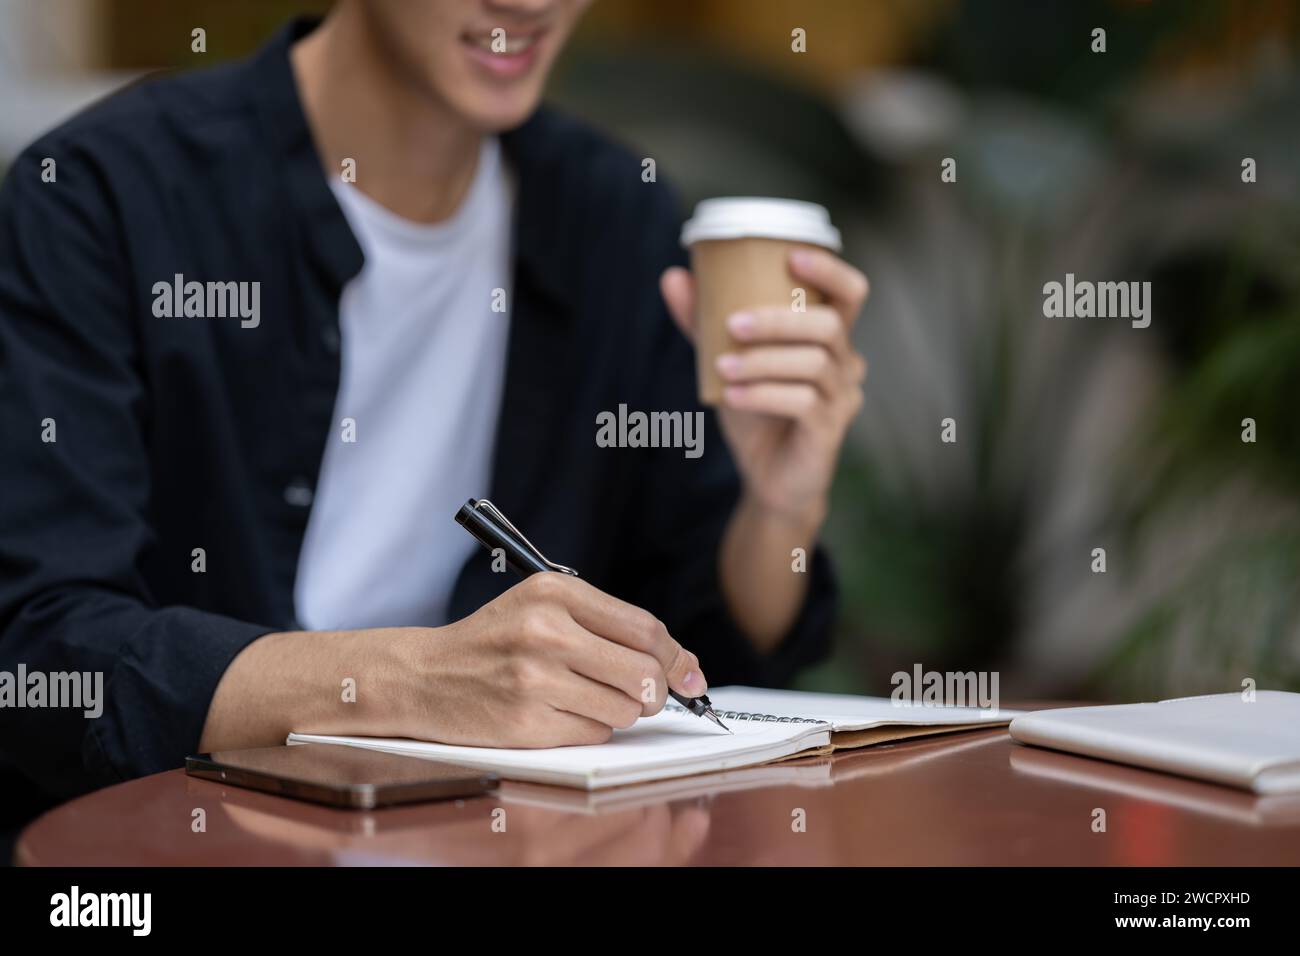 Close-up image of a young Asian man writing something in his book and sipping coffee at a table in a coffee shop. working remotely, digital nomad, fre Stock Photo